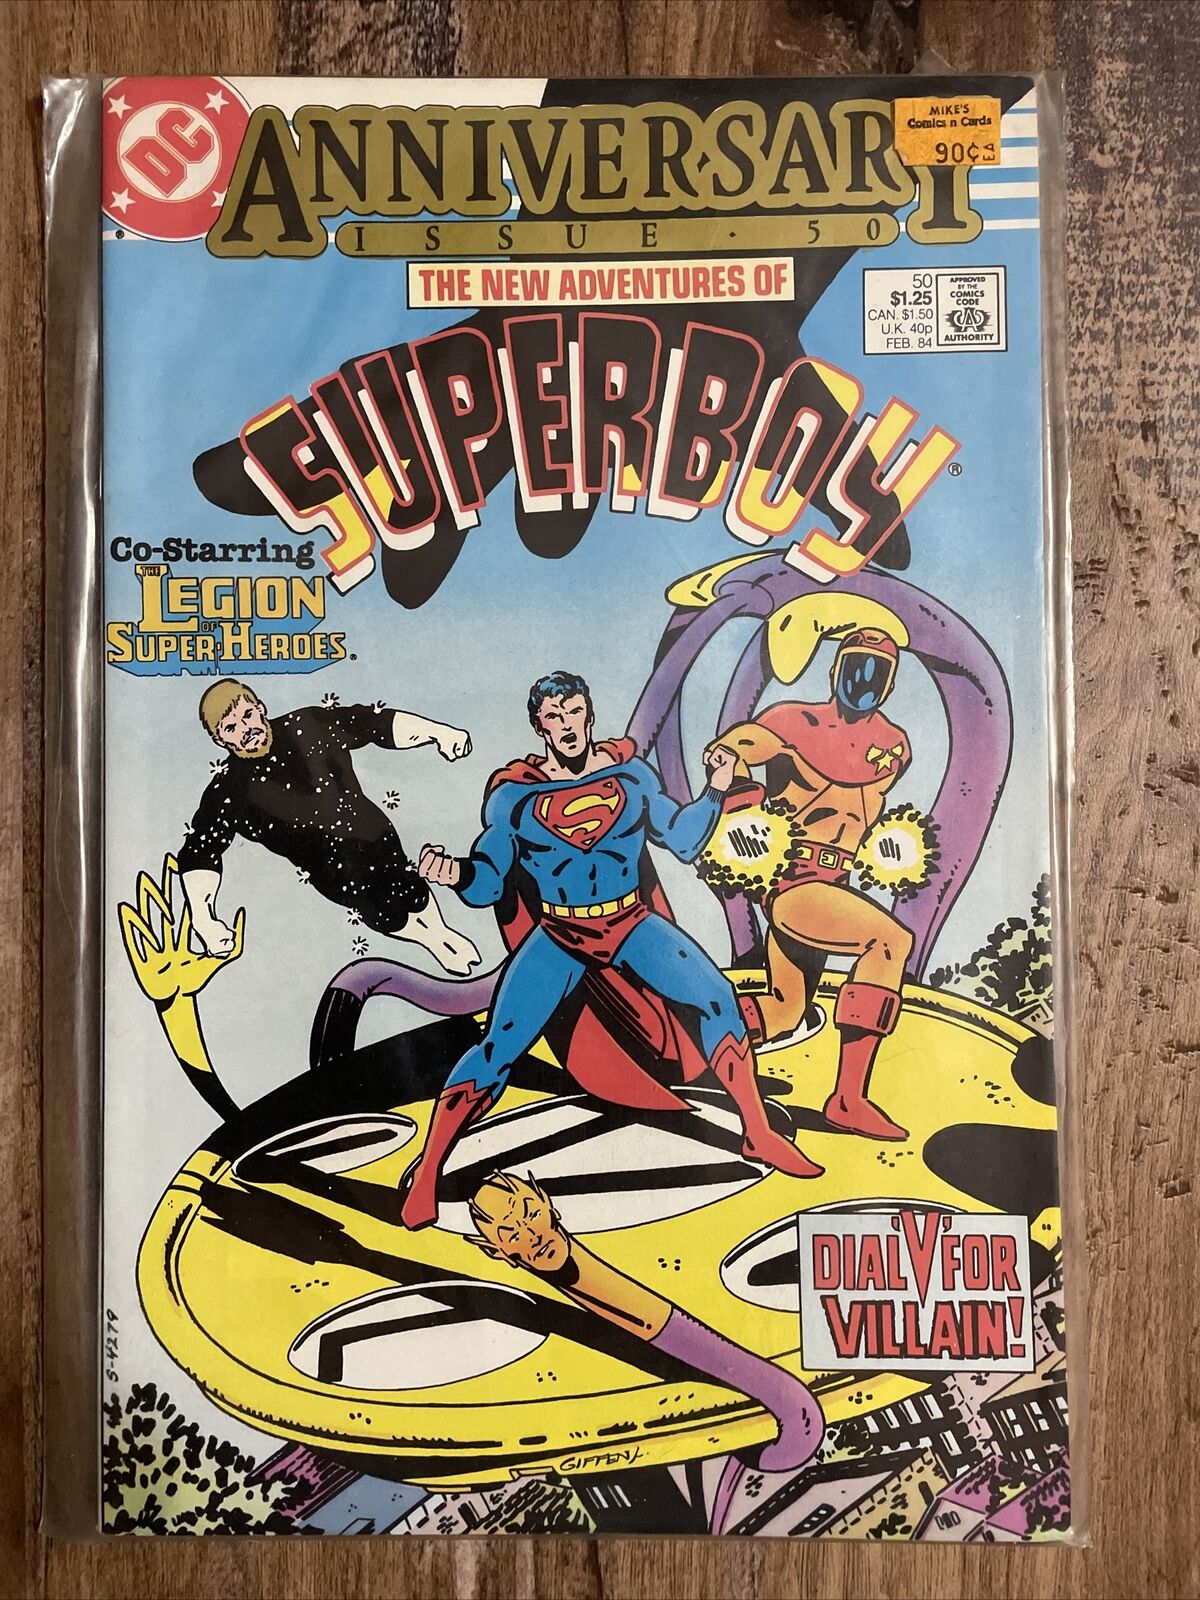 NEW ADVENTURES OF SUPERBOY # 50 (ANNIVERSARY ISSUE, FEB 1984) VF/NM